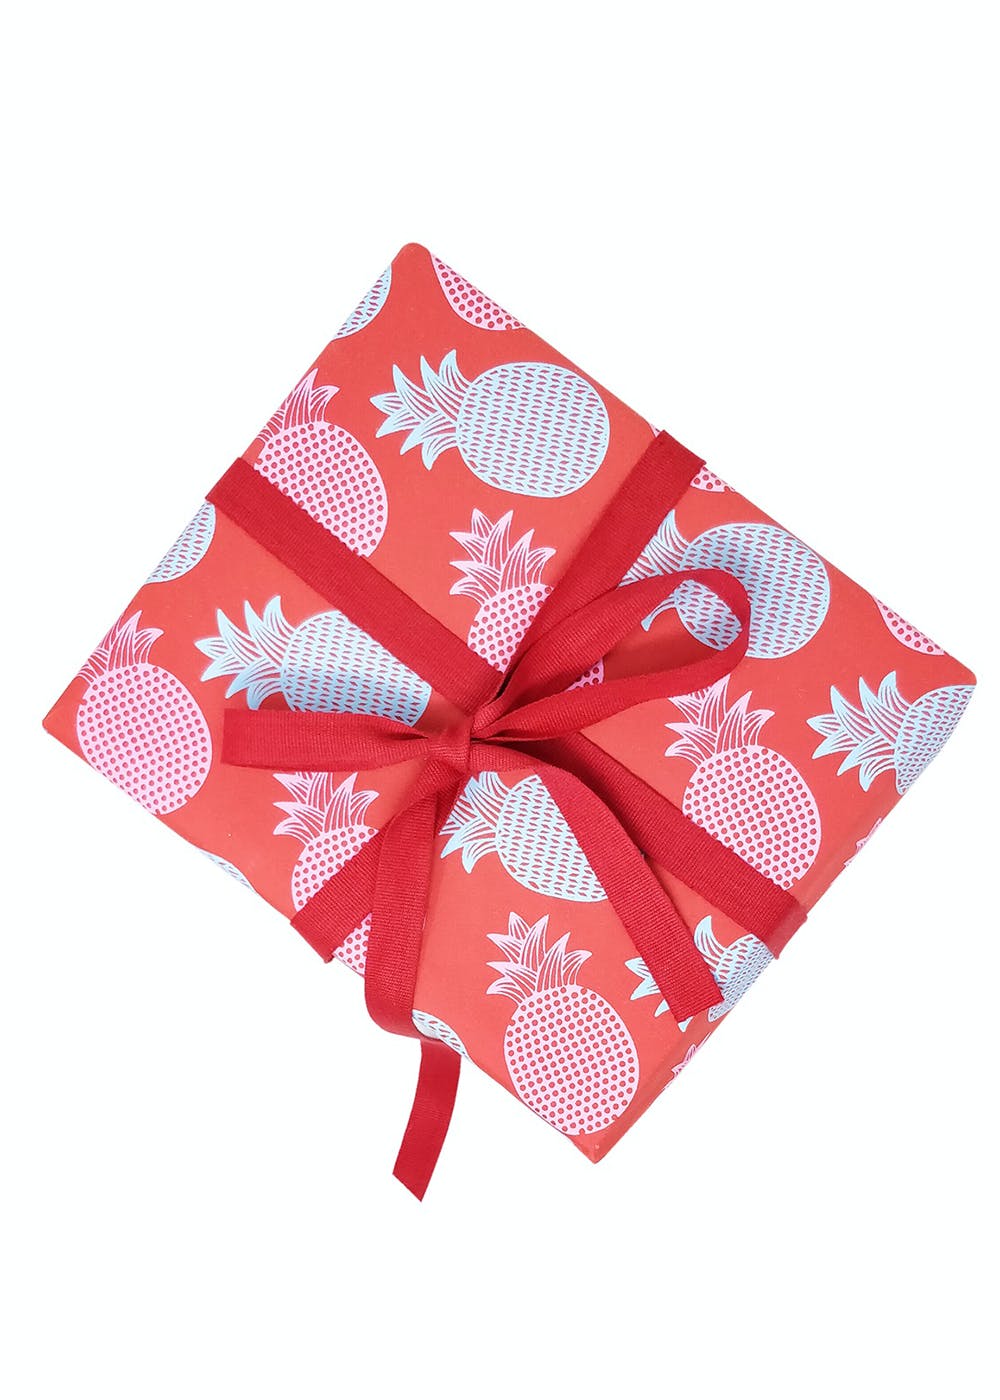 Buy Love Hearts VALENTINES GIFT WRAP Set, Red Hearts Wrapping Paper Gift  Wrap Set, Wrapping Paper Set, Valentines Gift Online in India - Etsy